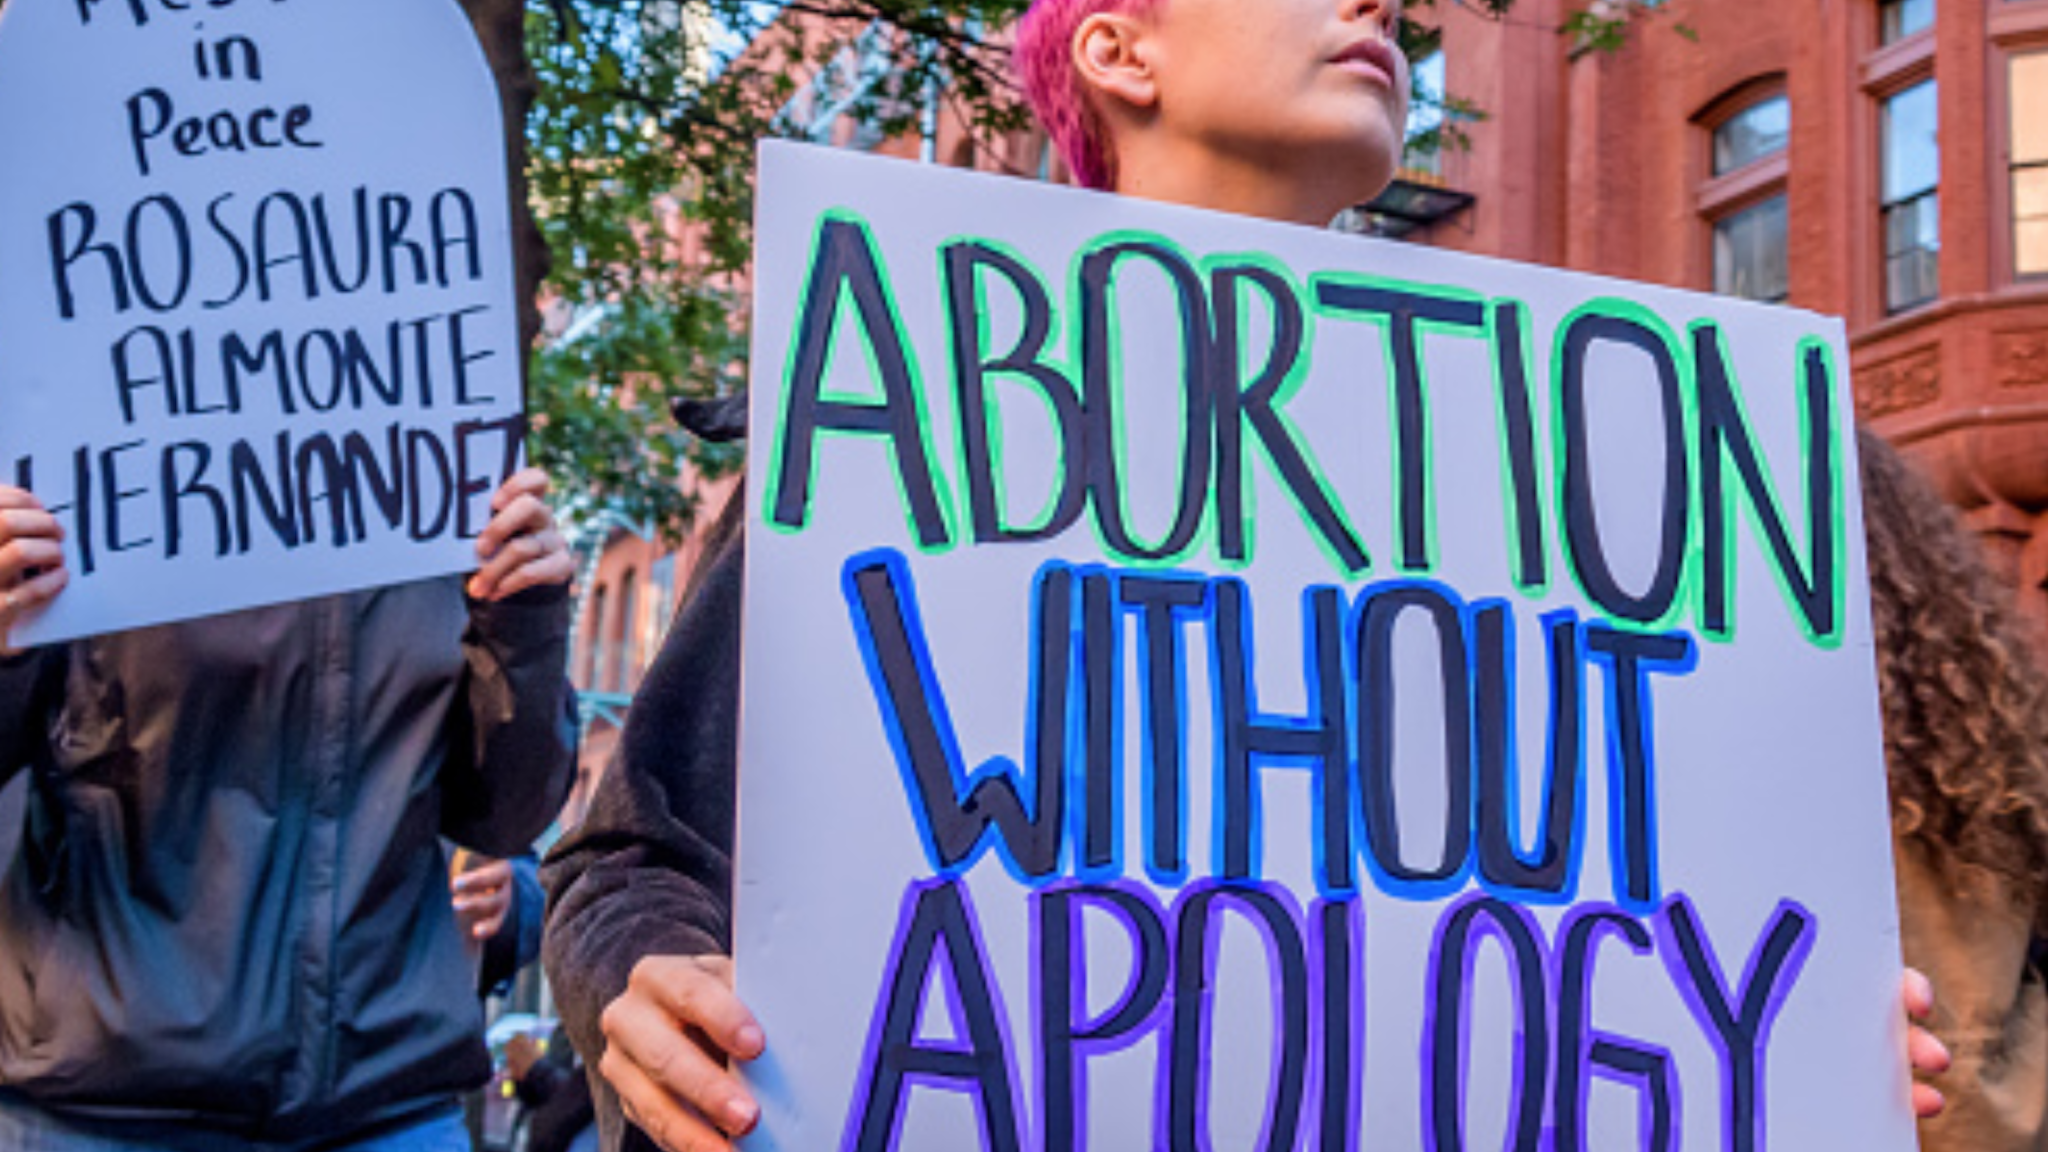 MANHATTAN, NEW YORK, UNITED STATES - 2019/10/05: Pro choice protesters picketed outside the church where anti-abortion groups gathered. Abortion Rights activists from a number of organizations held a demonstration outside of the Basilica of St. Patrick's Old Cathedral in SoHo, where congregants meet on the first Saturday of every month before marching to the Planned Parenthood clinic on Bleecker Street to pray, and to allegedly harass and intimidate patients as they enter the clinic.